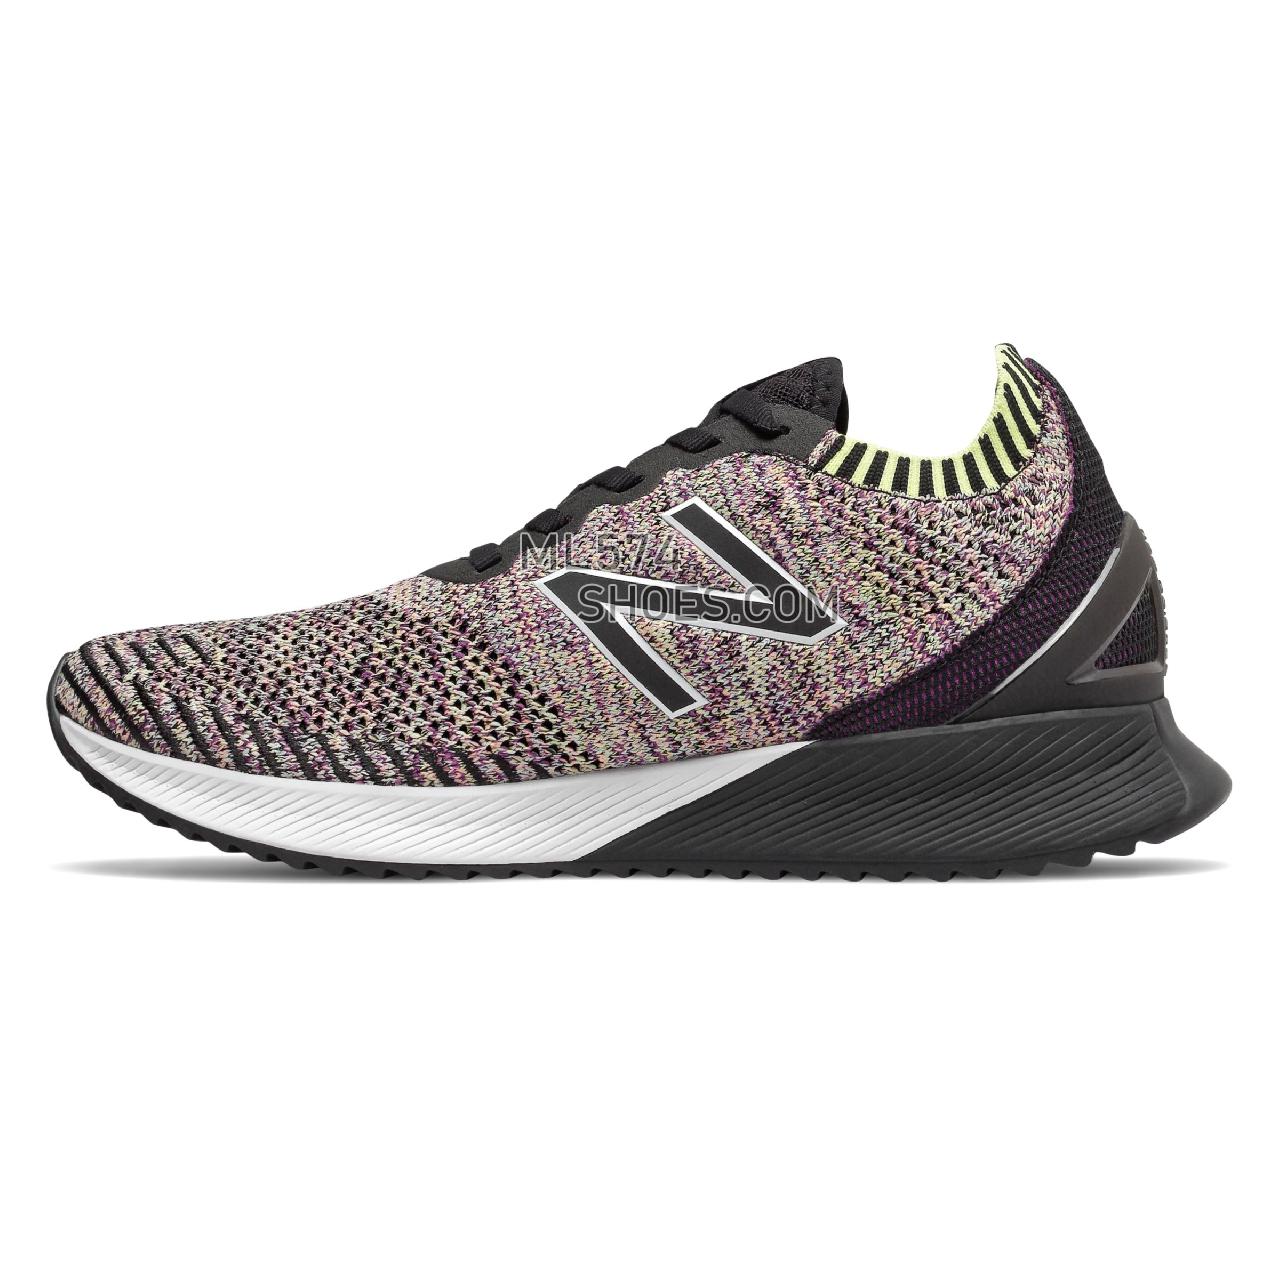 New Balance FuelCell Echo - Women's Neutral Running - Plum with Bali Blue and Ginger Pink - WFCECCM